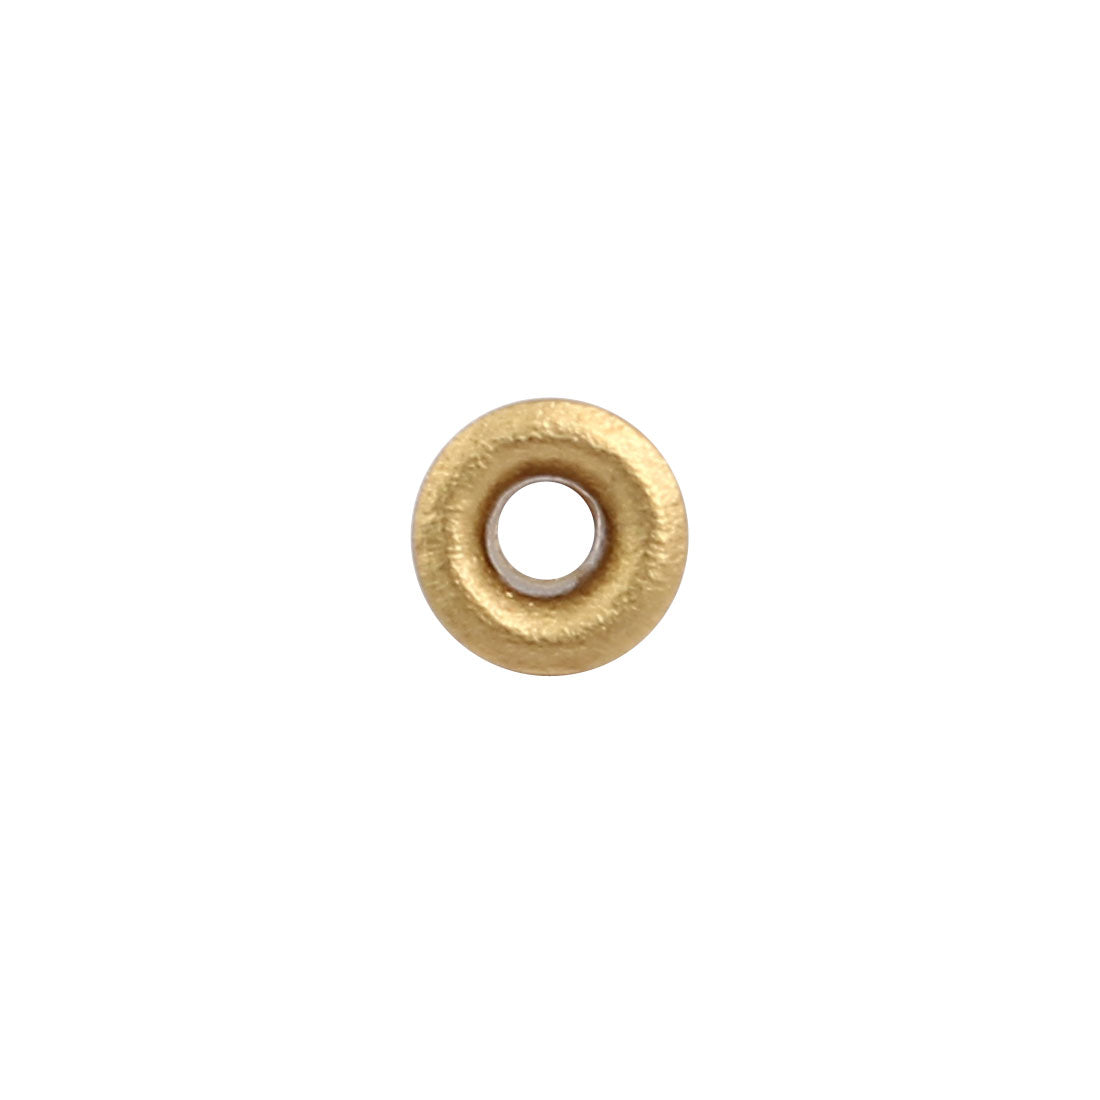 uxcell Uxcell 500pcs M2x2mm Brass Plated Metal Hollow Eyelets Rivets Gold Tone